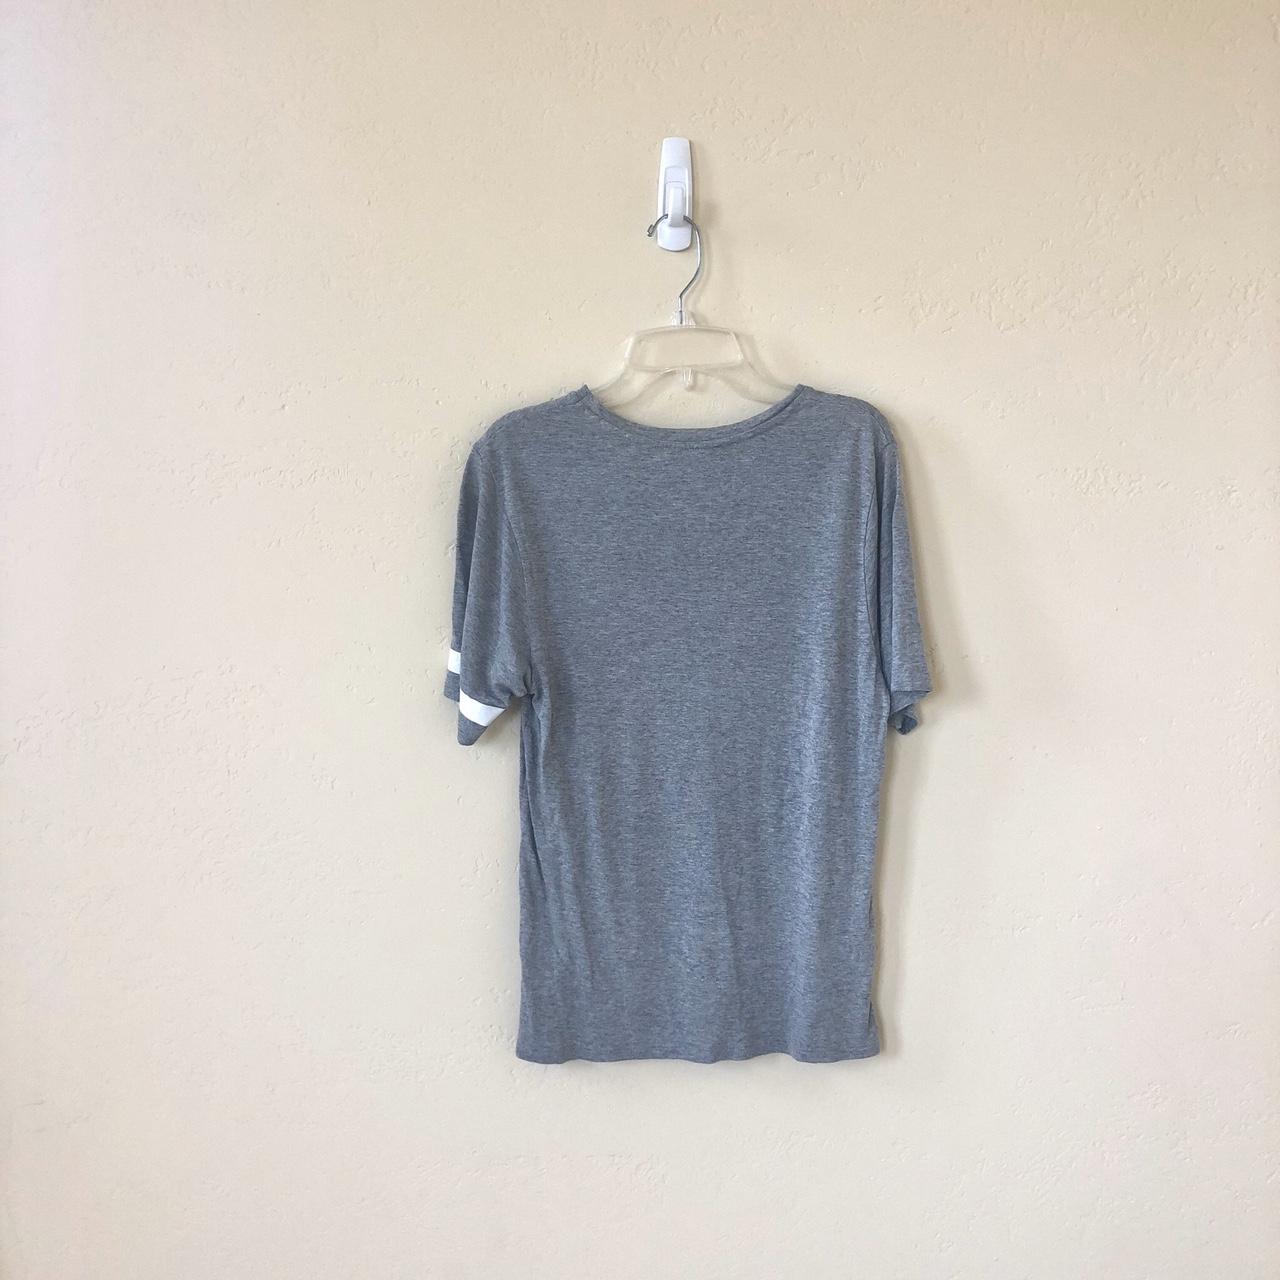 New Look Women's Grey and Pink T-shirt (3)